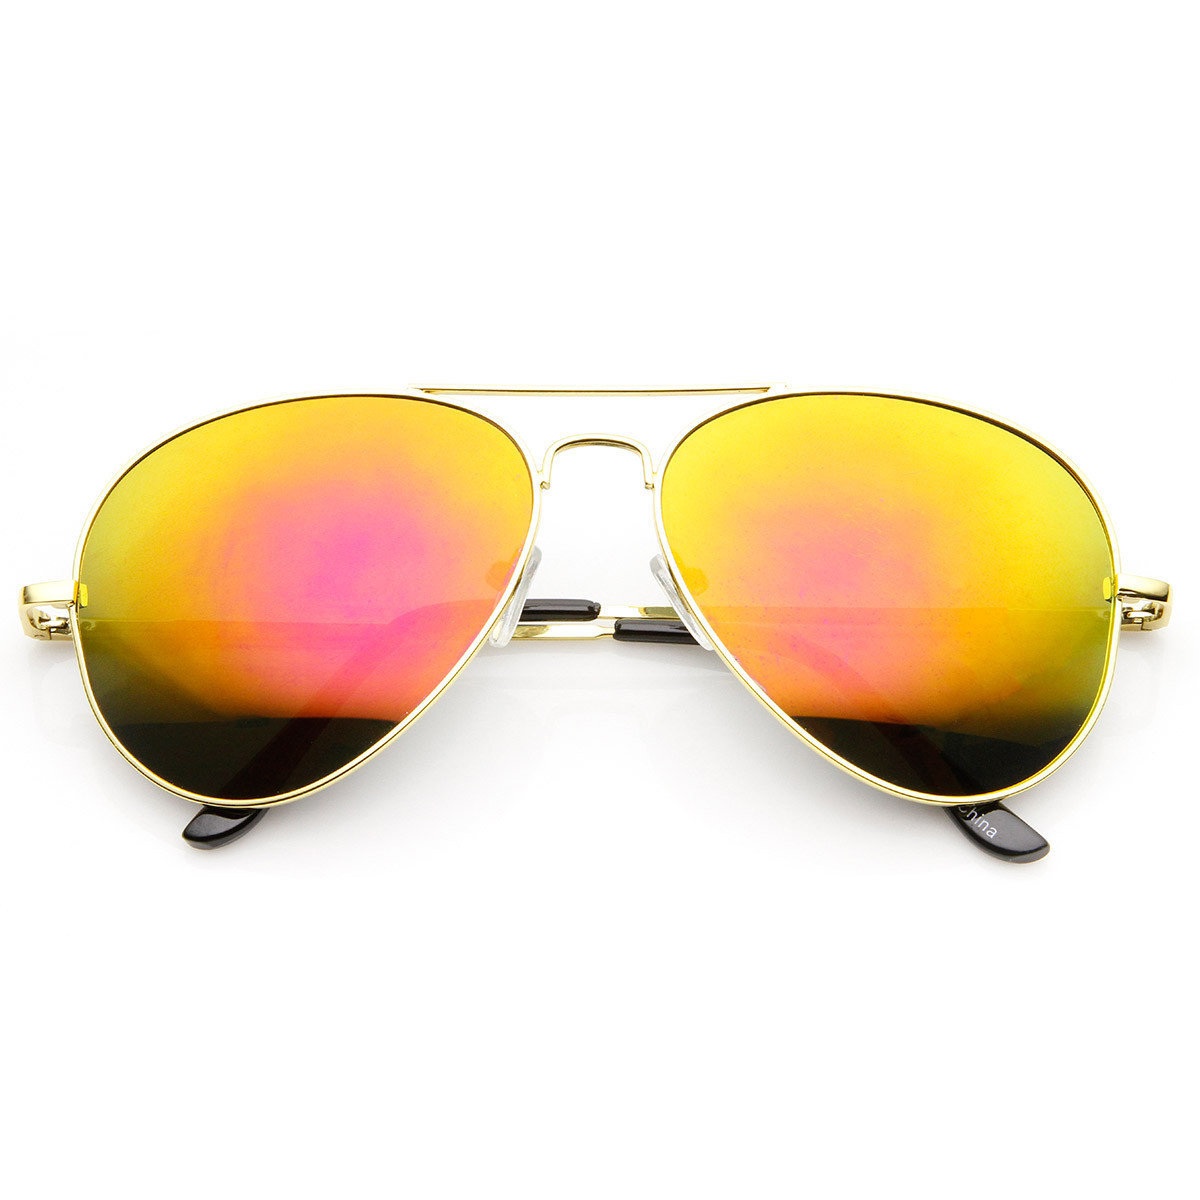 Classic Metal Teardrop Color Mirror Lens Aviator Sunglasses W/ Spring Hinges - 1486 - Gold / Red Mirror